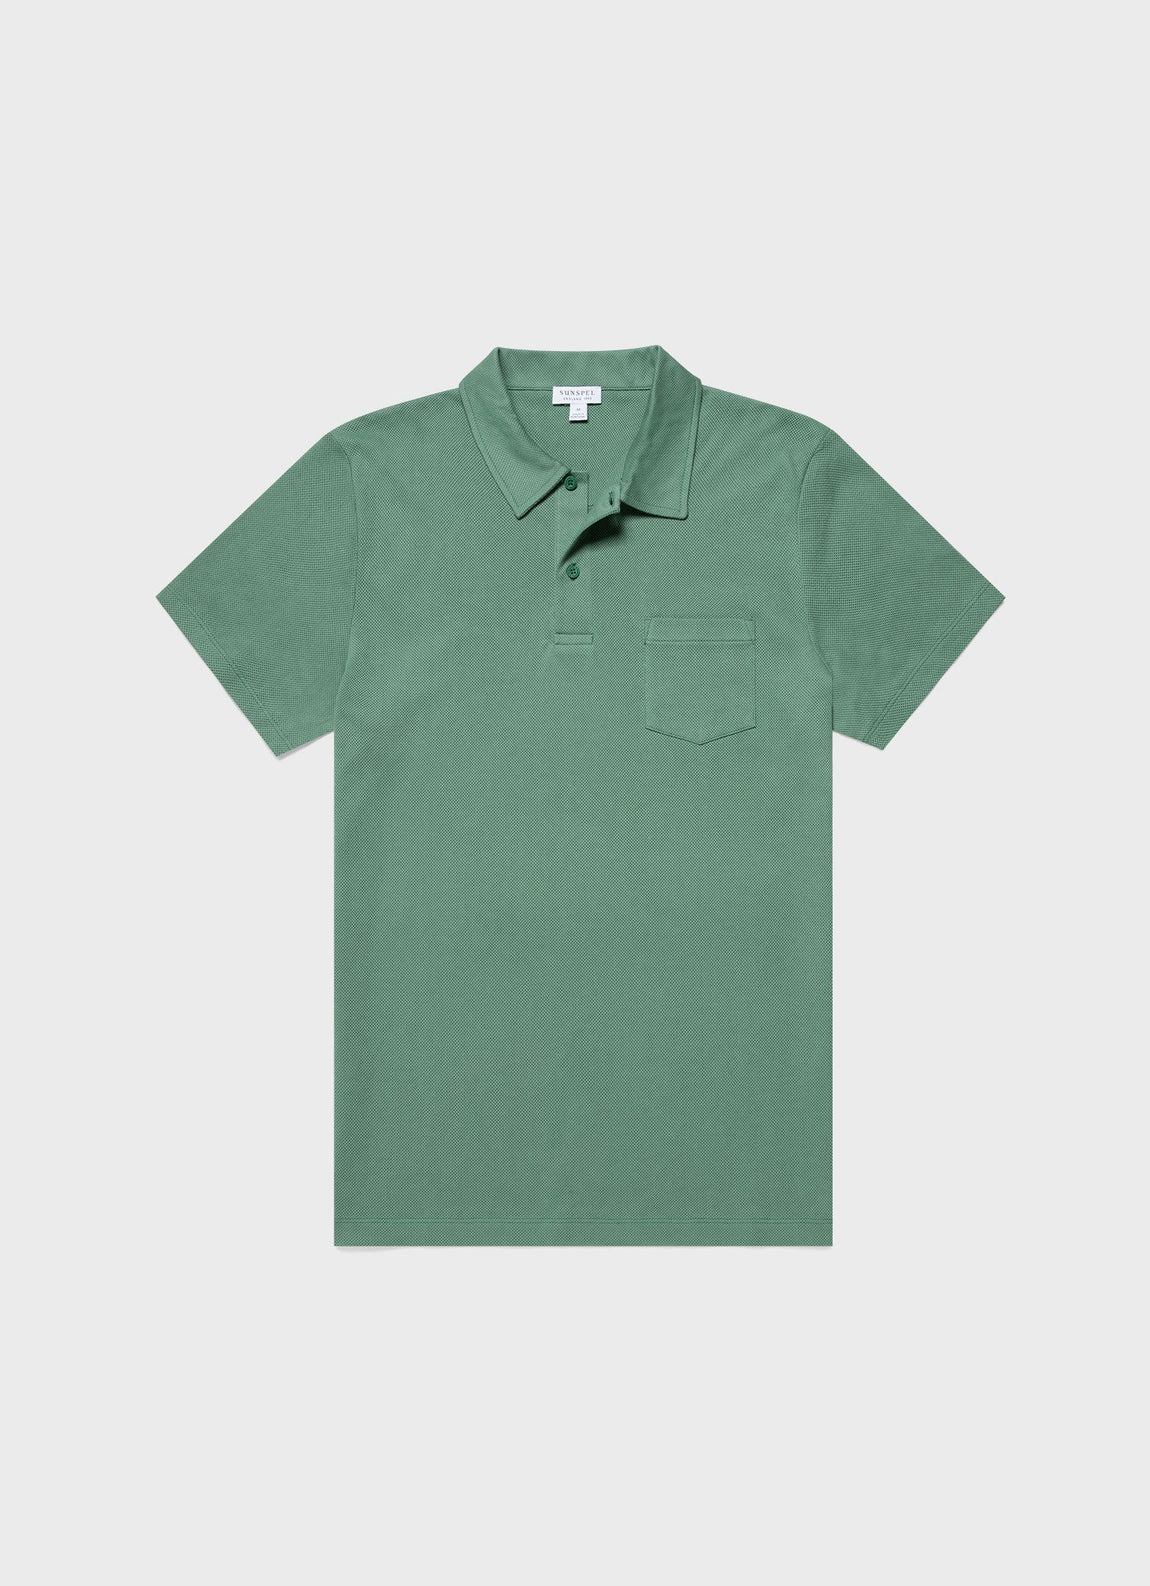 Men's Riviera Polo Shirt in Thyme